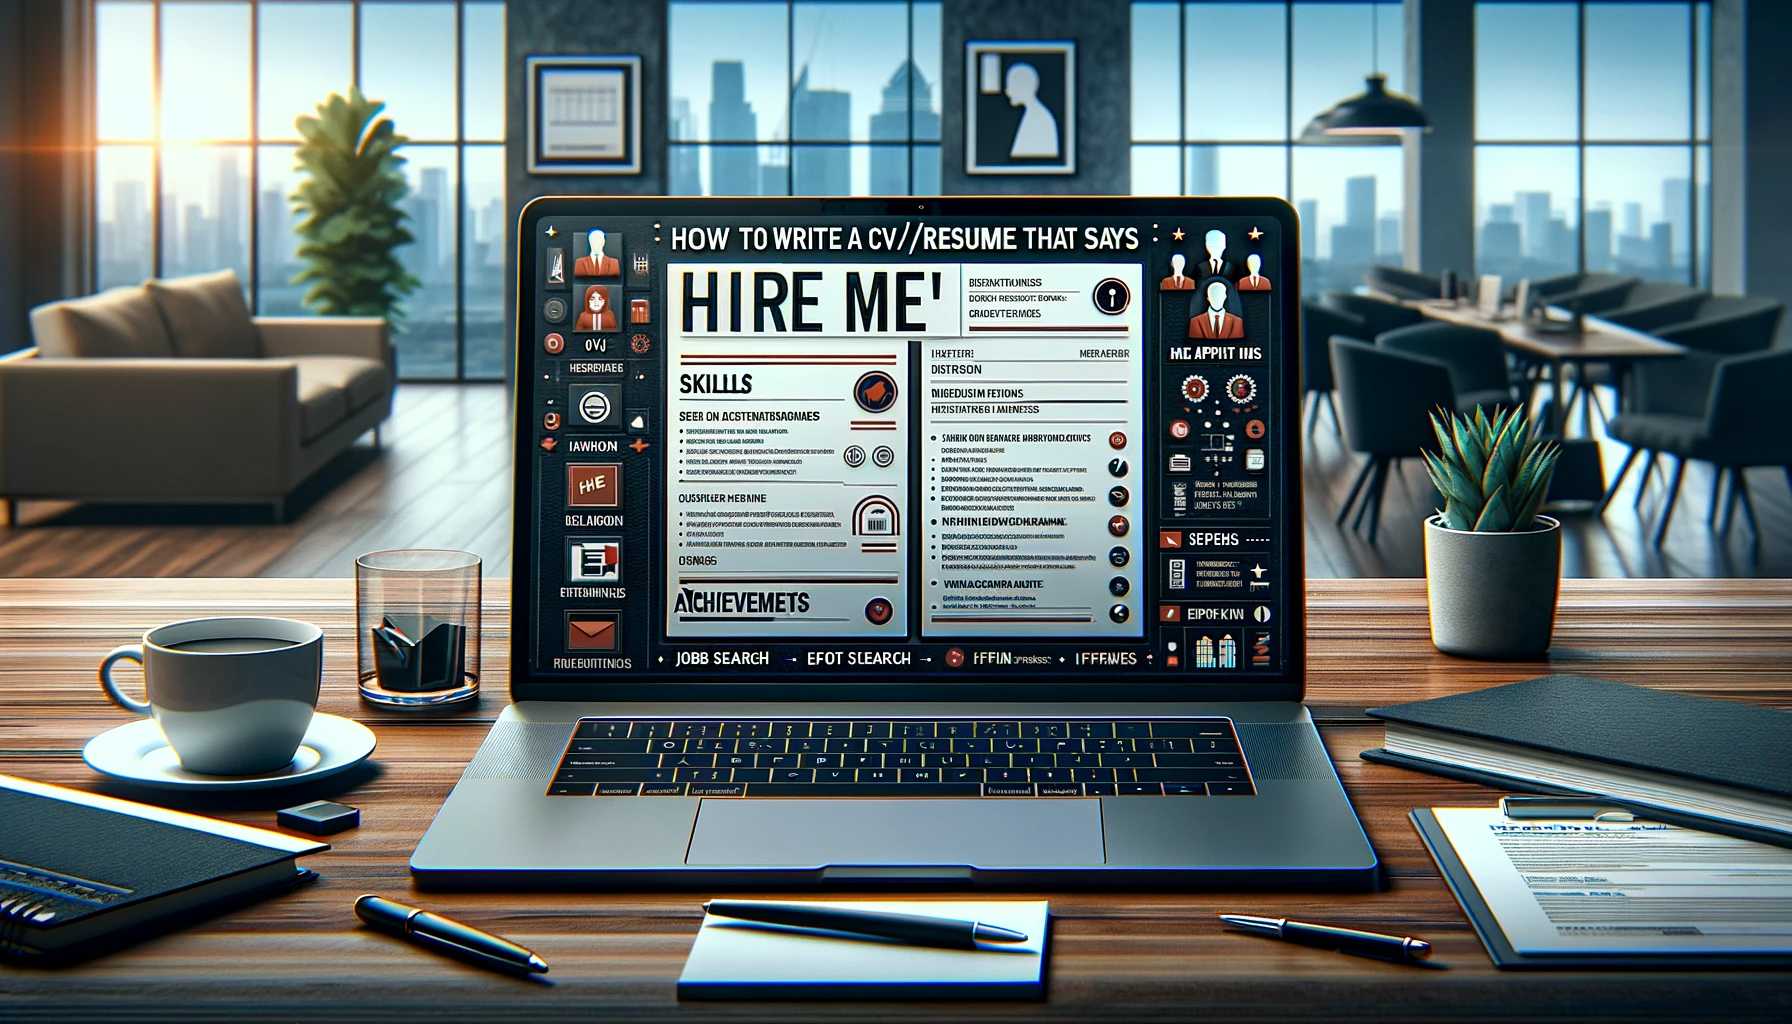 How To Write a CV/Resume That Says: HIRE ME